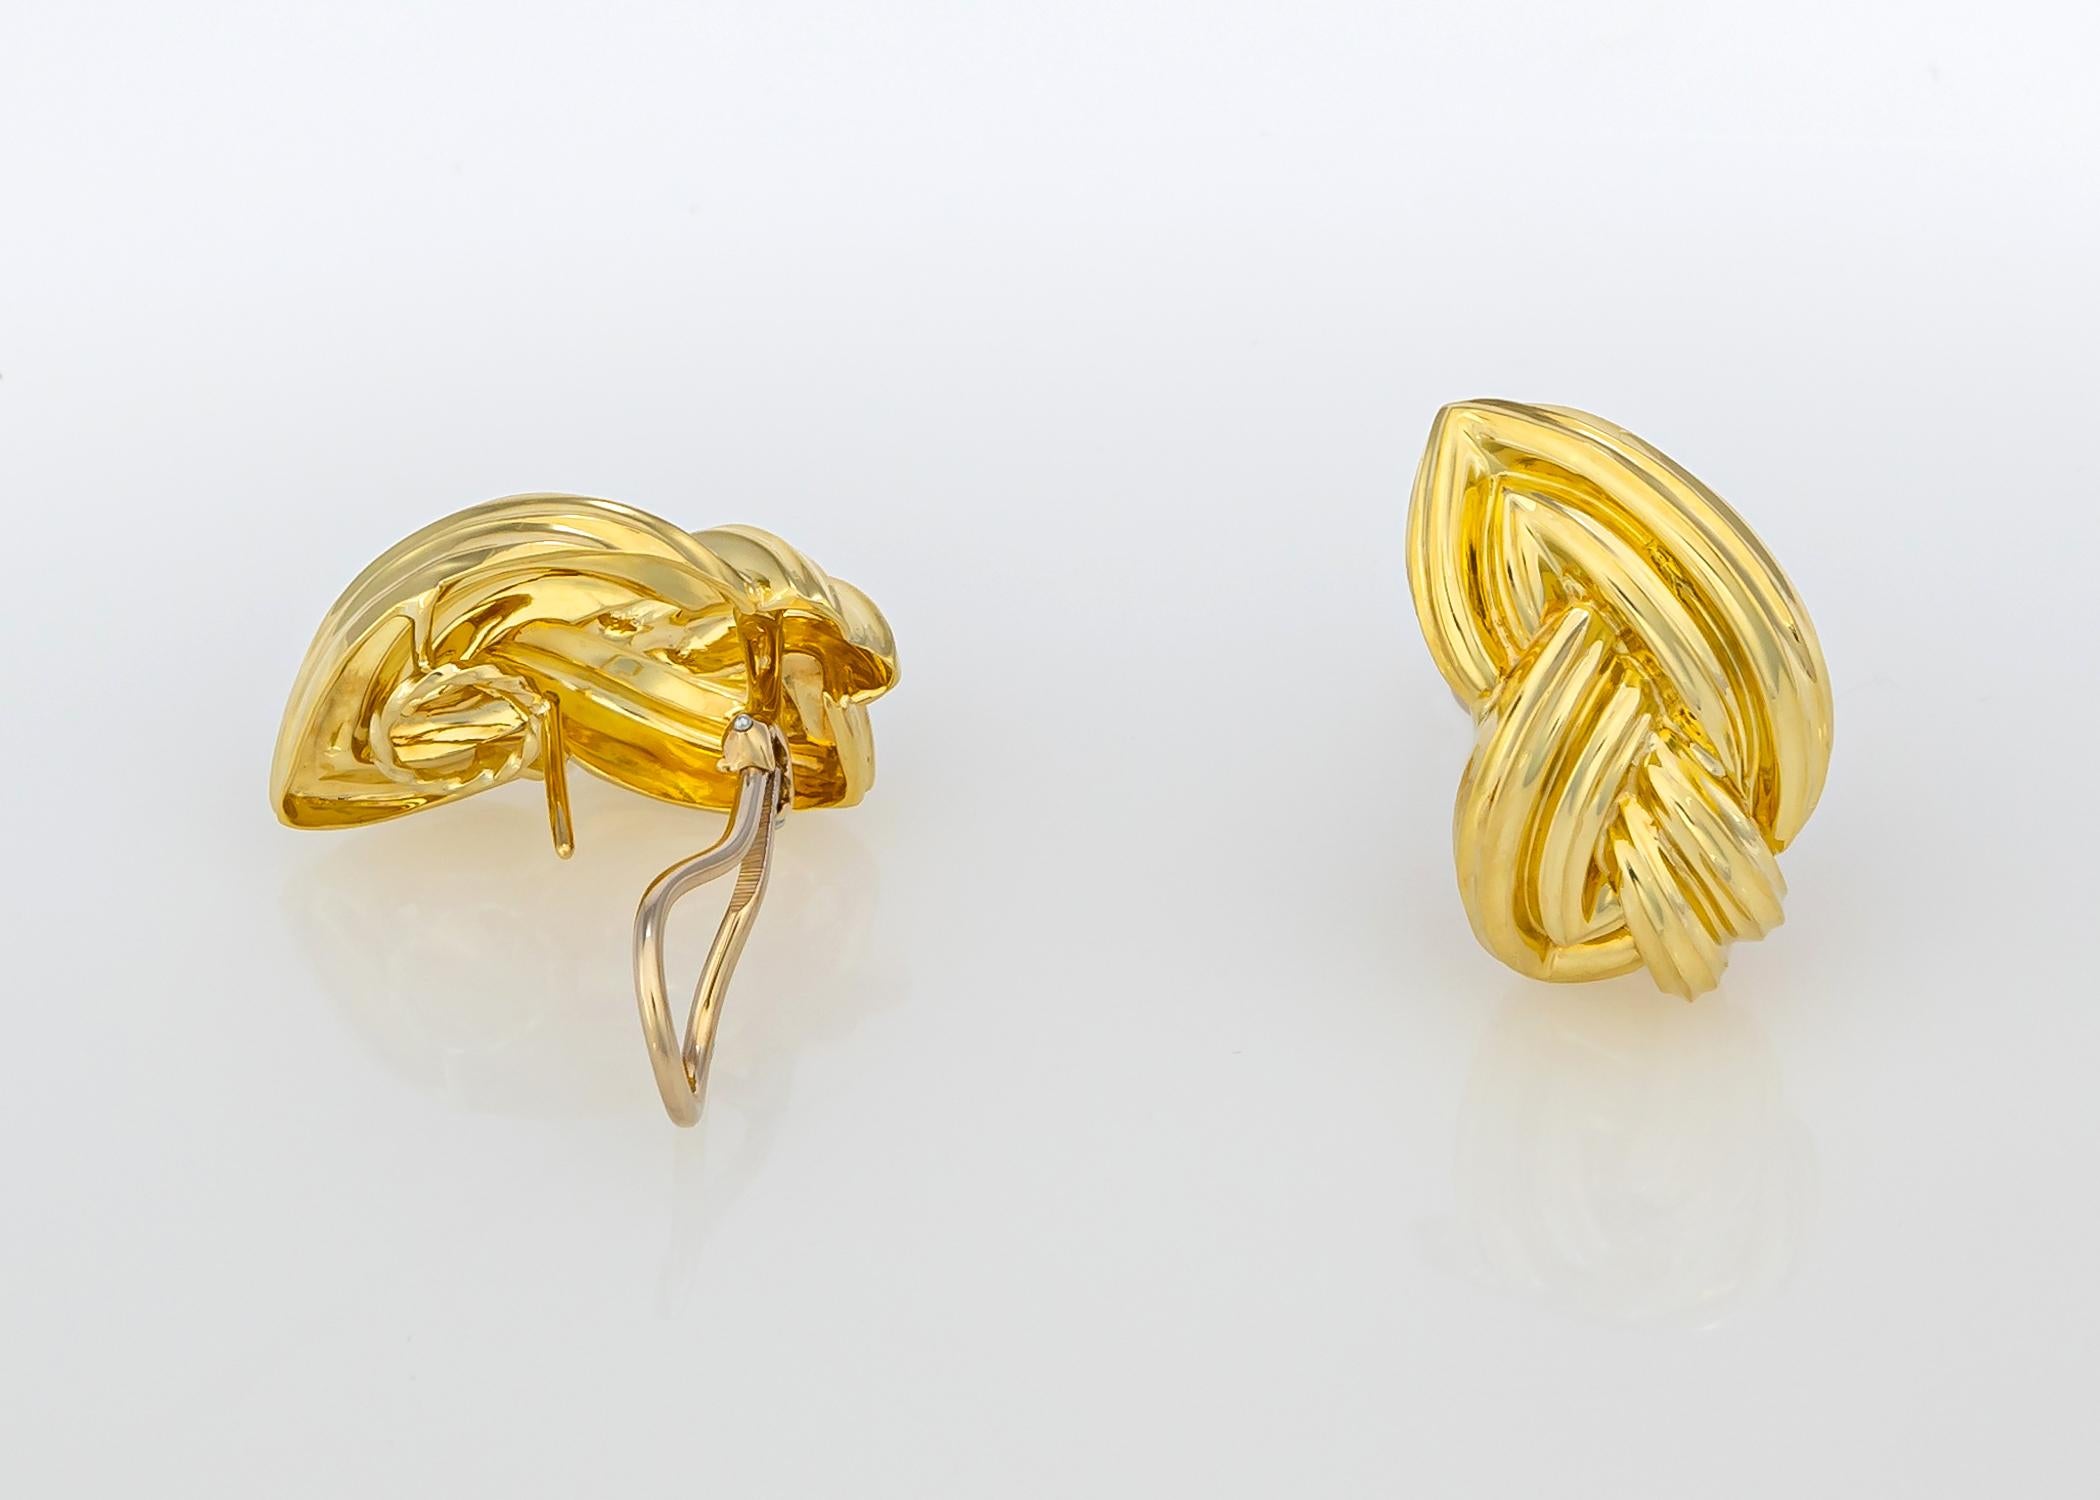 Henry Dunay Nightwind Gold Earrings In Excellent Condition For Sale In Atlanta, GA